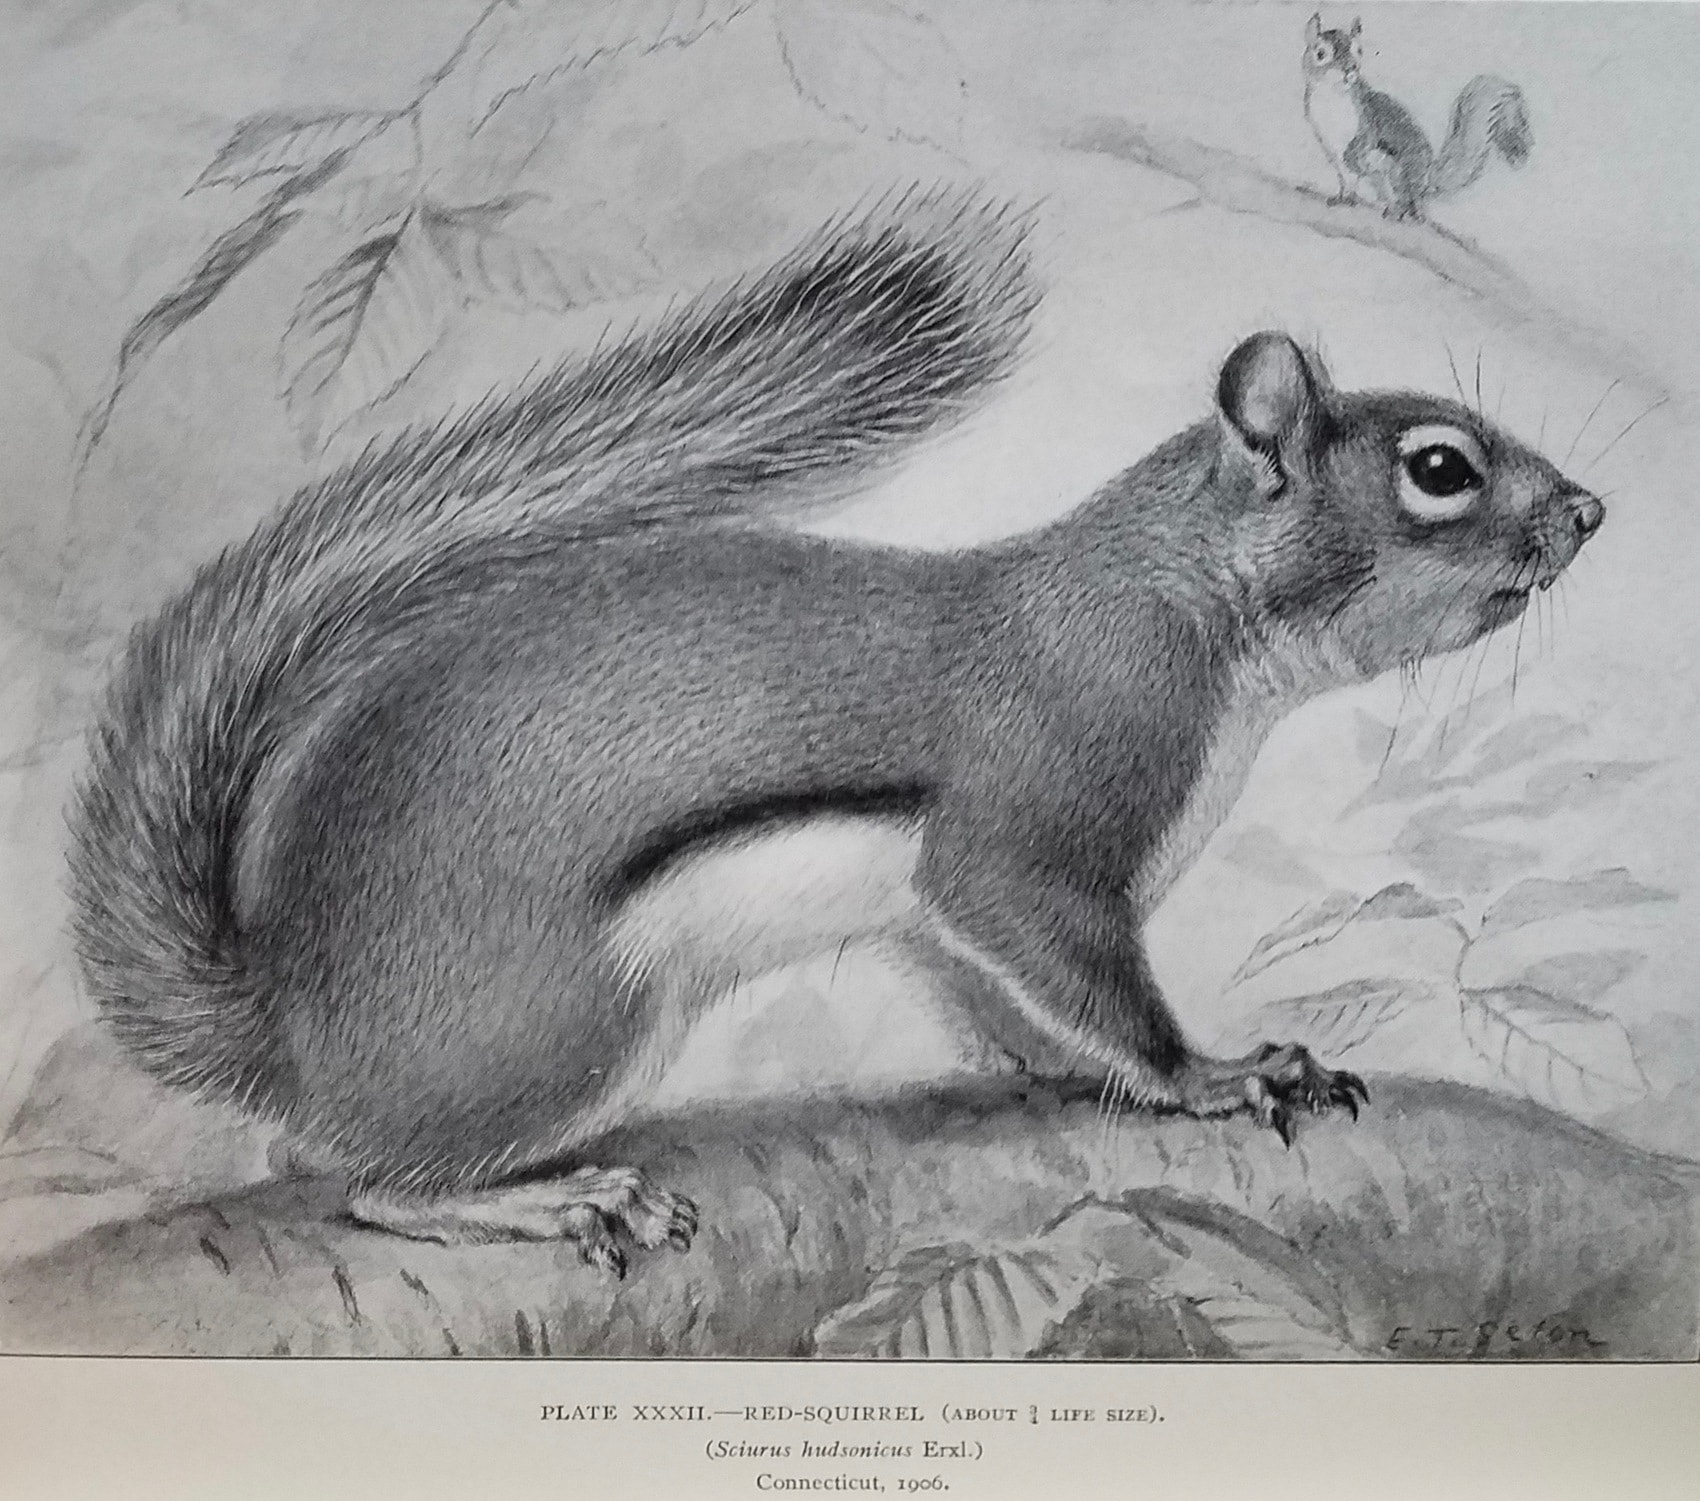 The Red-squirrel or Chickaree by Ernest Thompson Seton